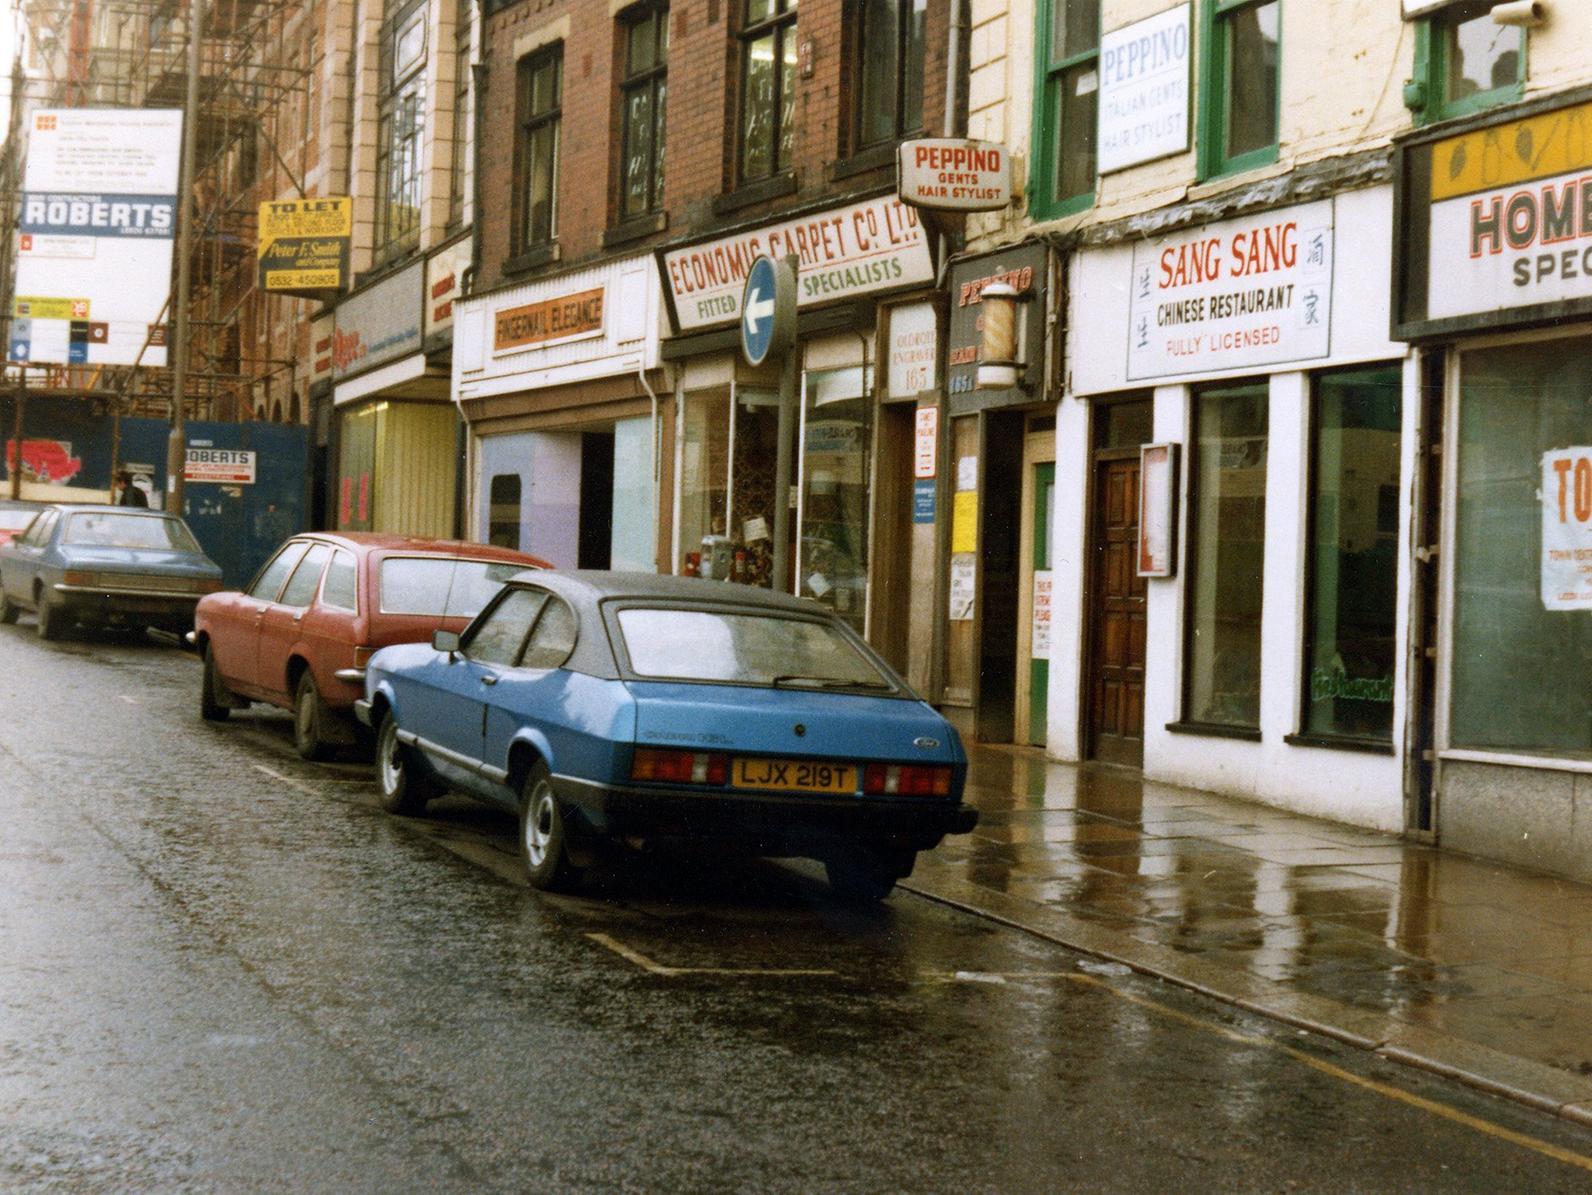 These photos turn back the clock to showcase life in Leeds during the 1980s. PICS: Leeds Libraries, www.leodis.net